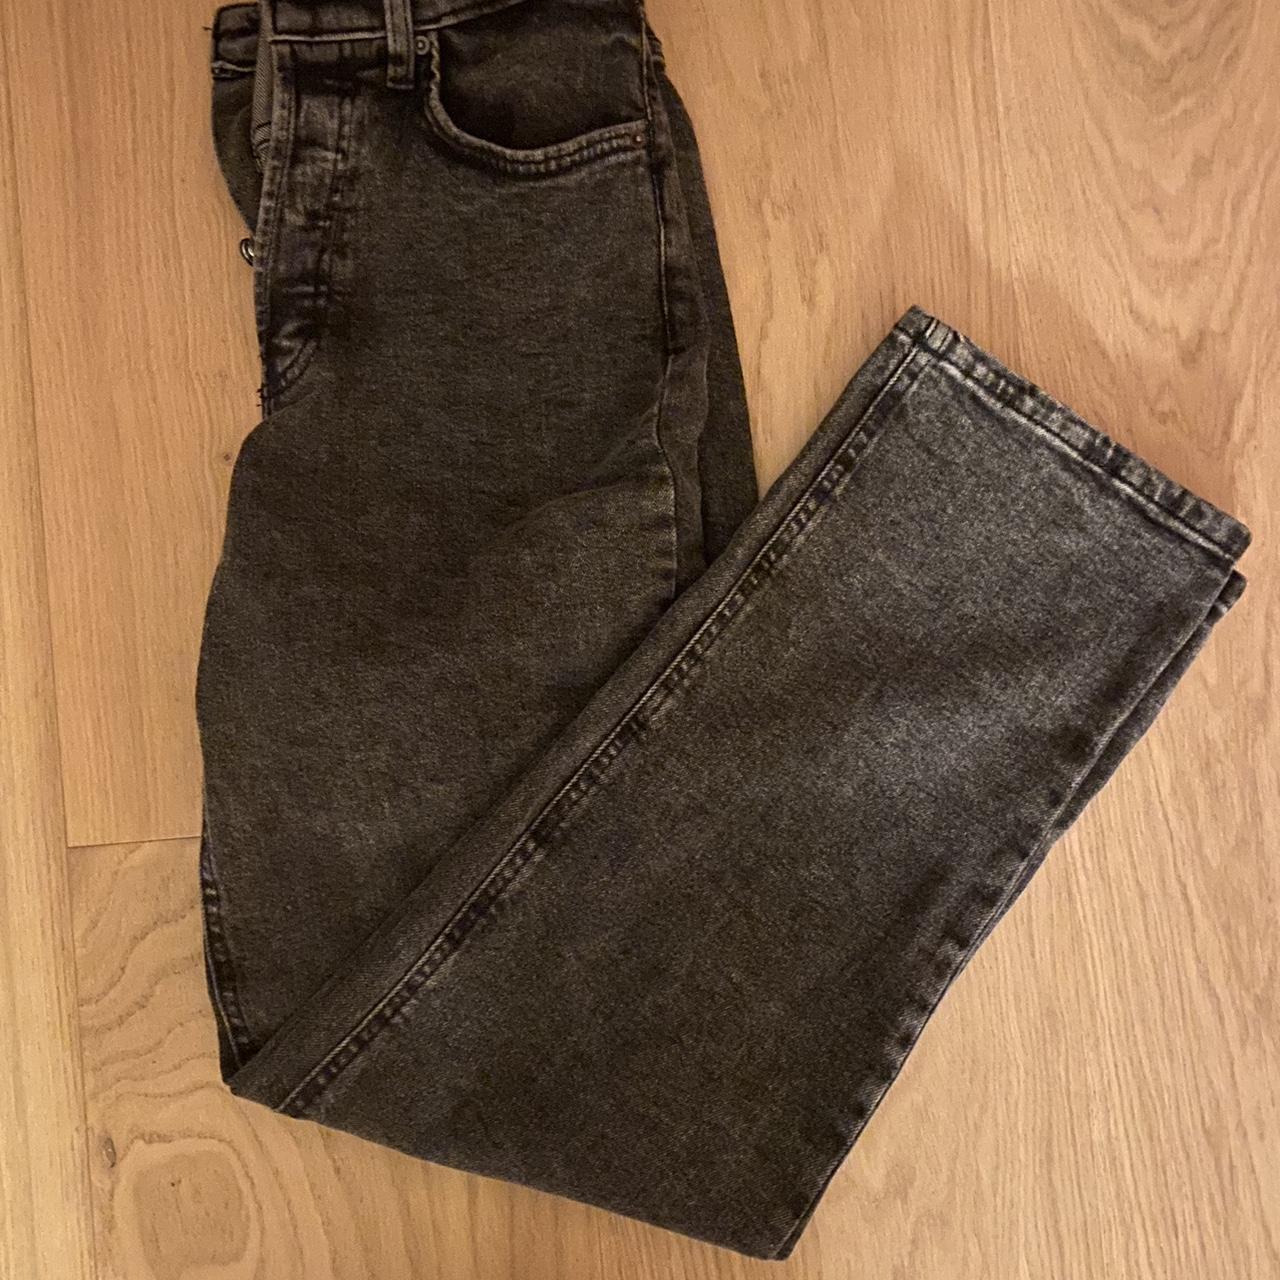 black wild fable jeans, high rise and baggy holes - Depop